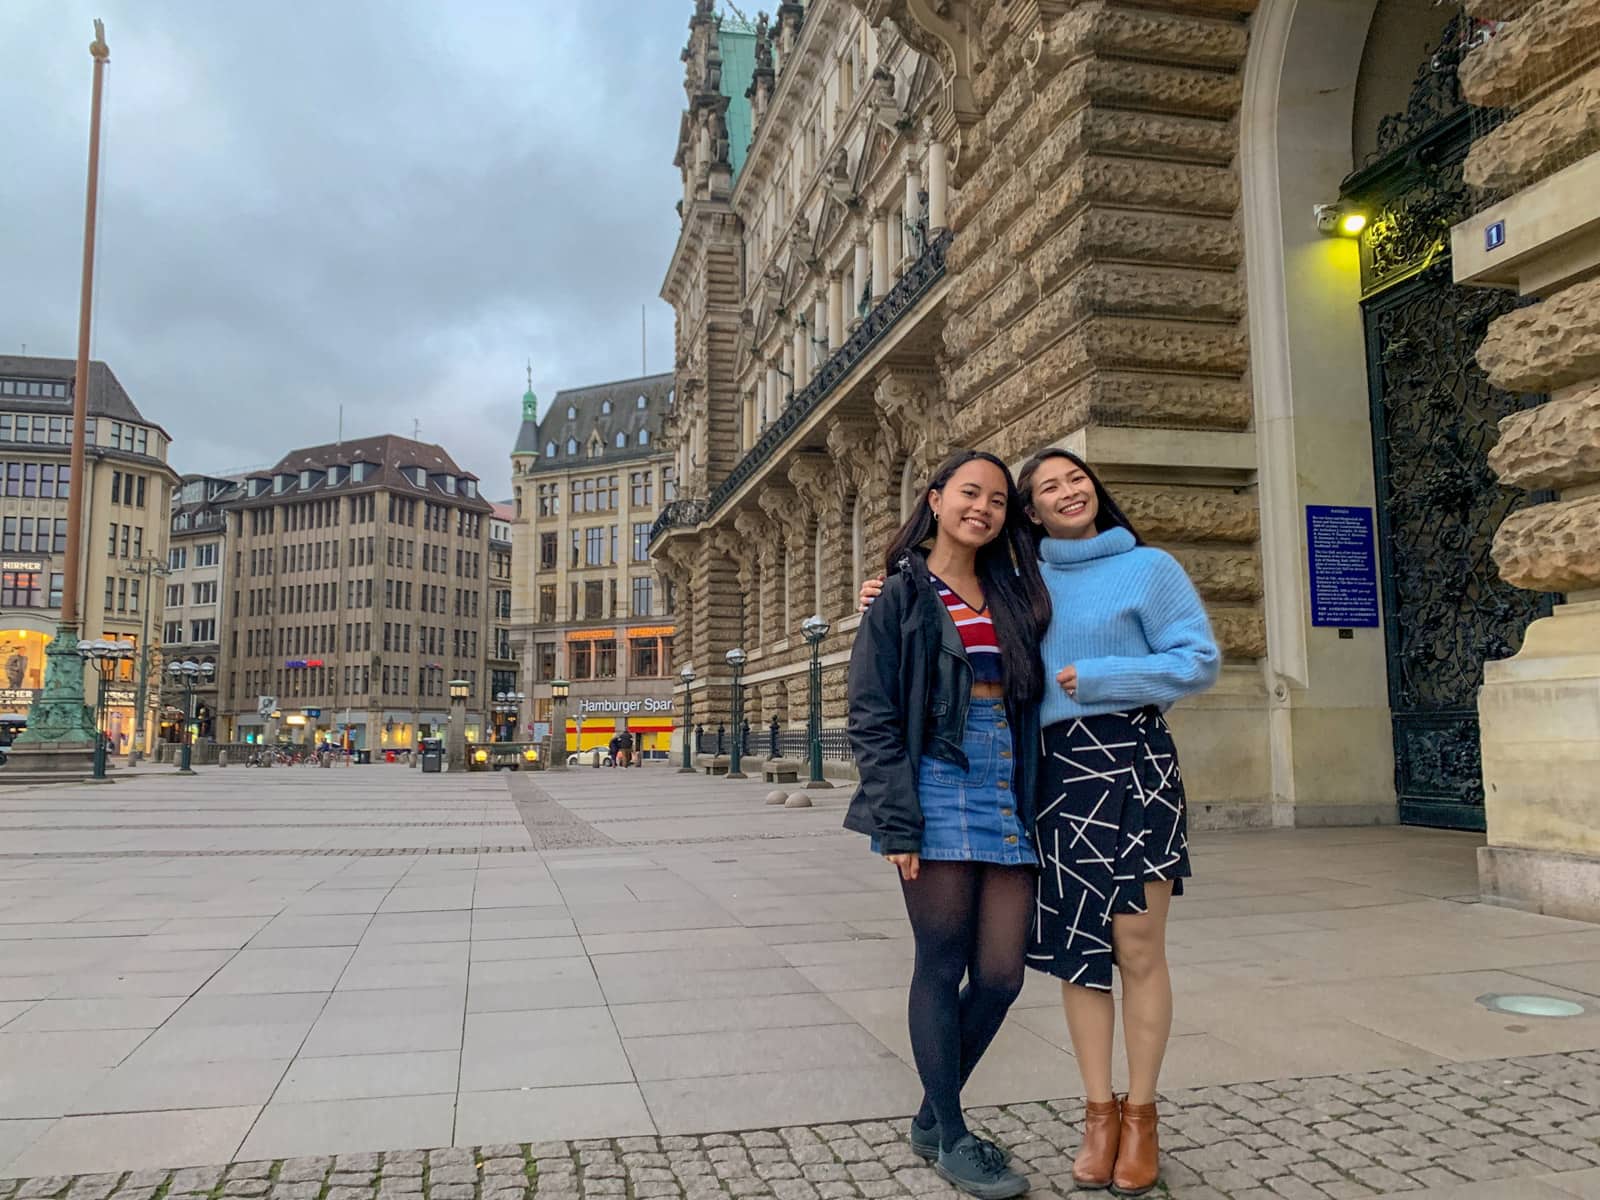 Two women with dark hair with their arms around each other, smiling. One is dressed in a denim skirt and black jacket, the other in a blue sweater and black patterned skirt. They are in a quiet and cloudy town square.